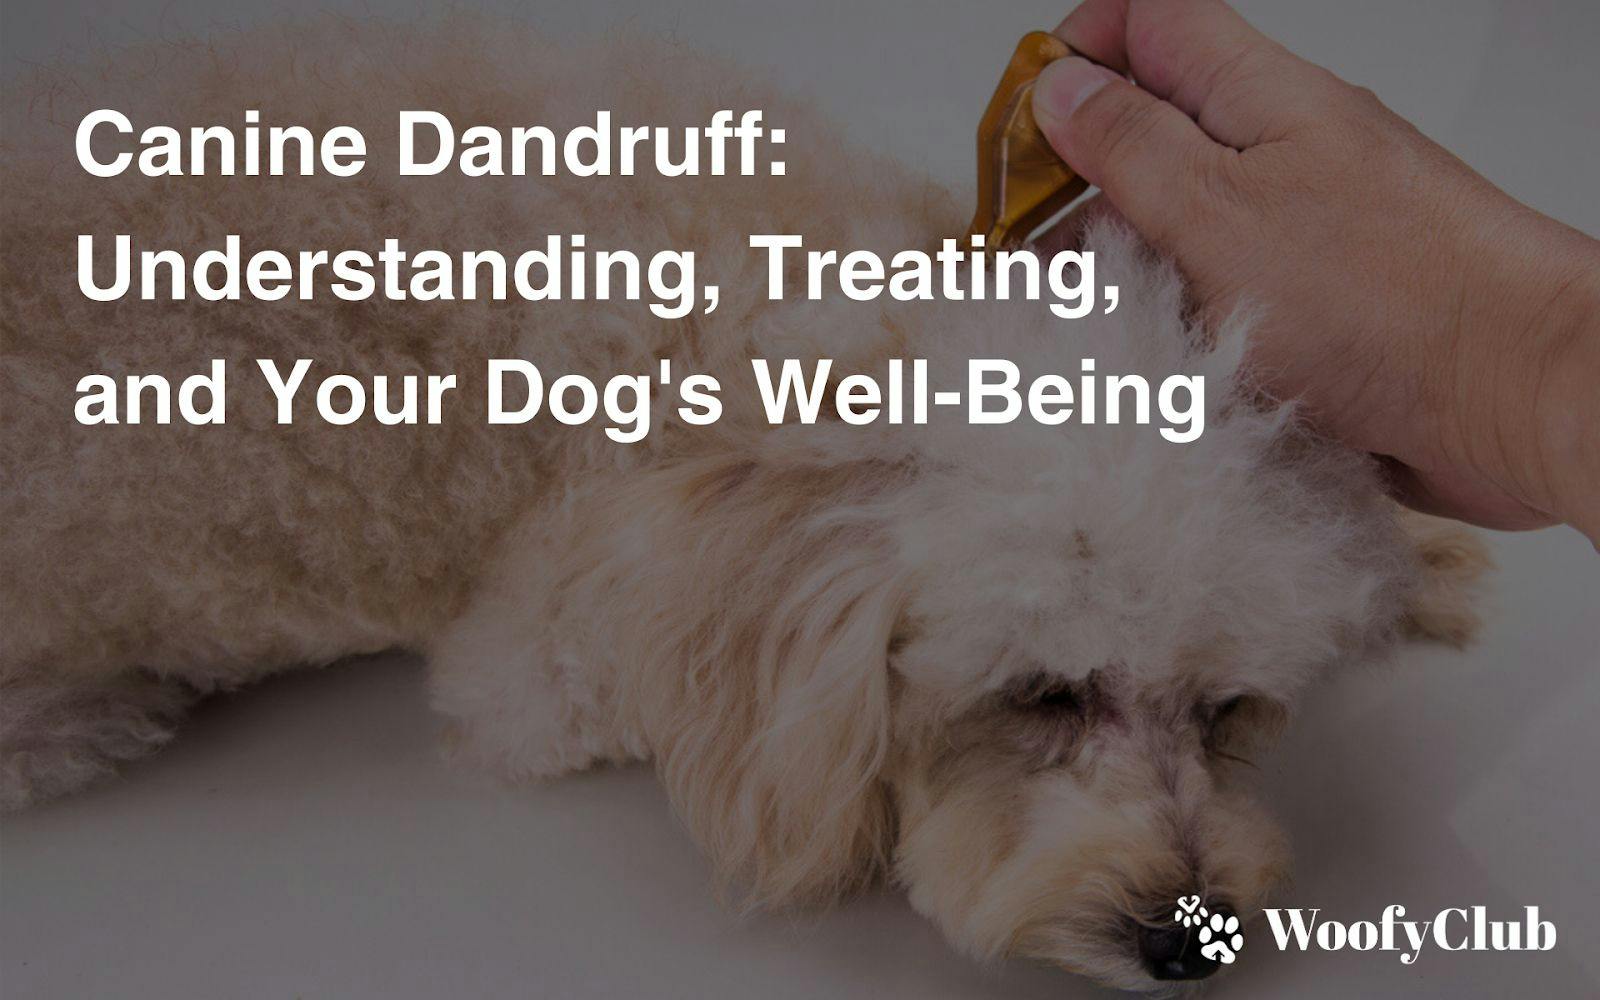 Canine Dandruff: Understanding, Treating, And Your Dog's Well-Being